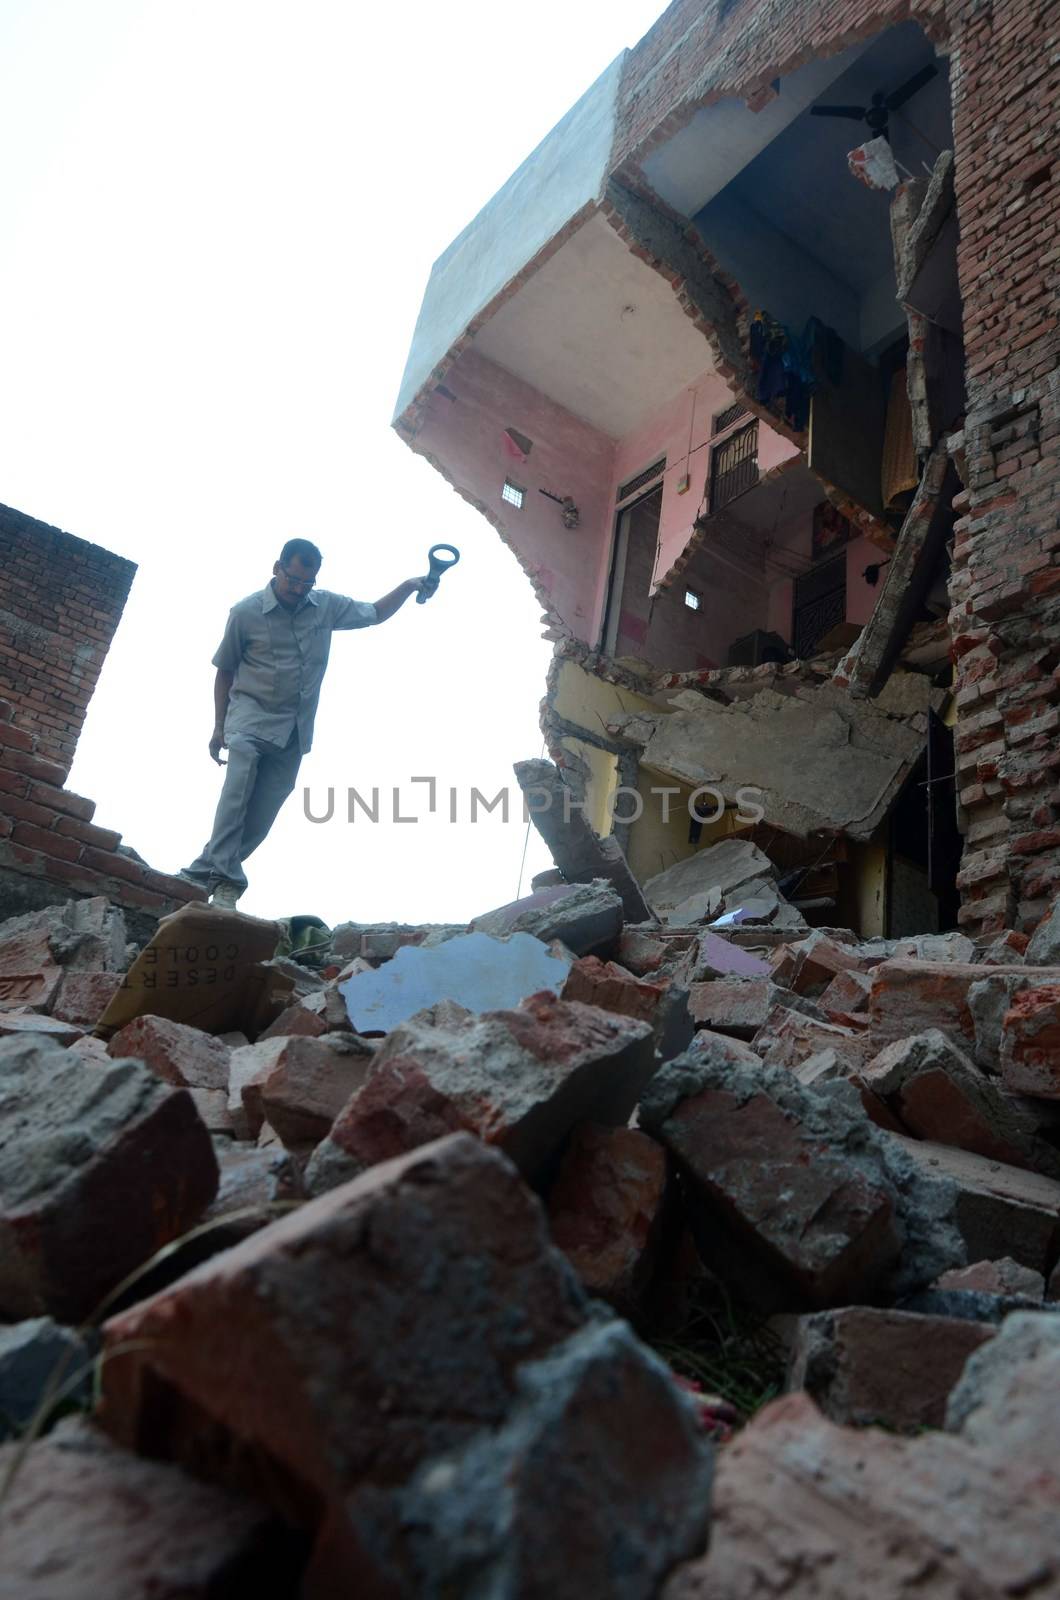 INDIA, Allahabad: A member of bomb disposal squad inspecting the aftermath of an explosion on October 6, 2015, the blast caused two houses to collapse, killing two people and critically injuring three others.  According to our contributor on the ground, the firecracker factory was operating illegally.